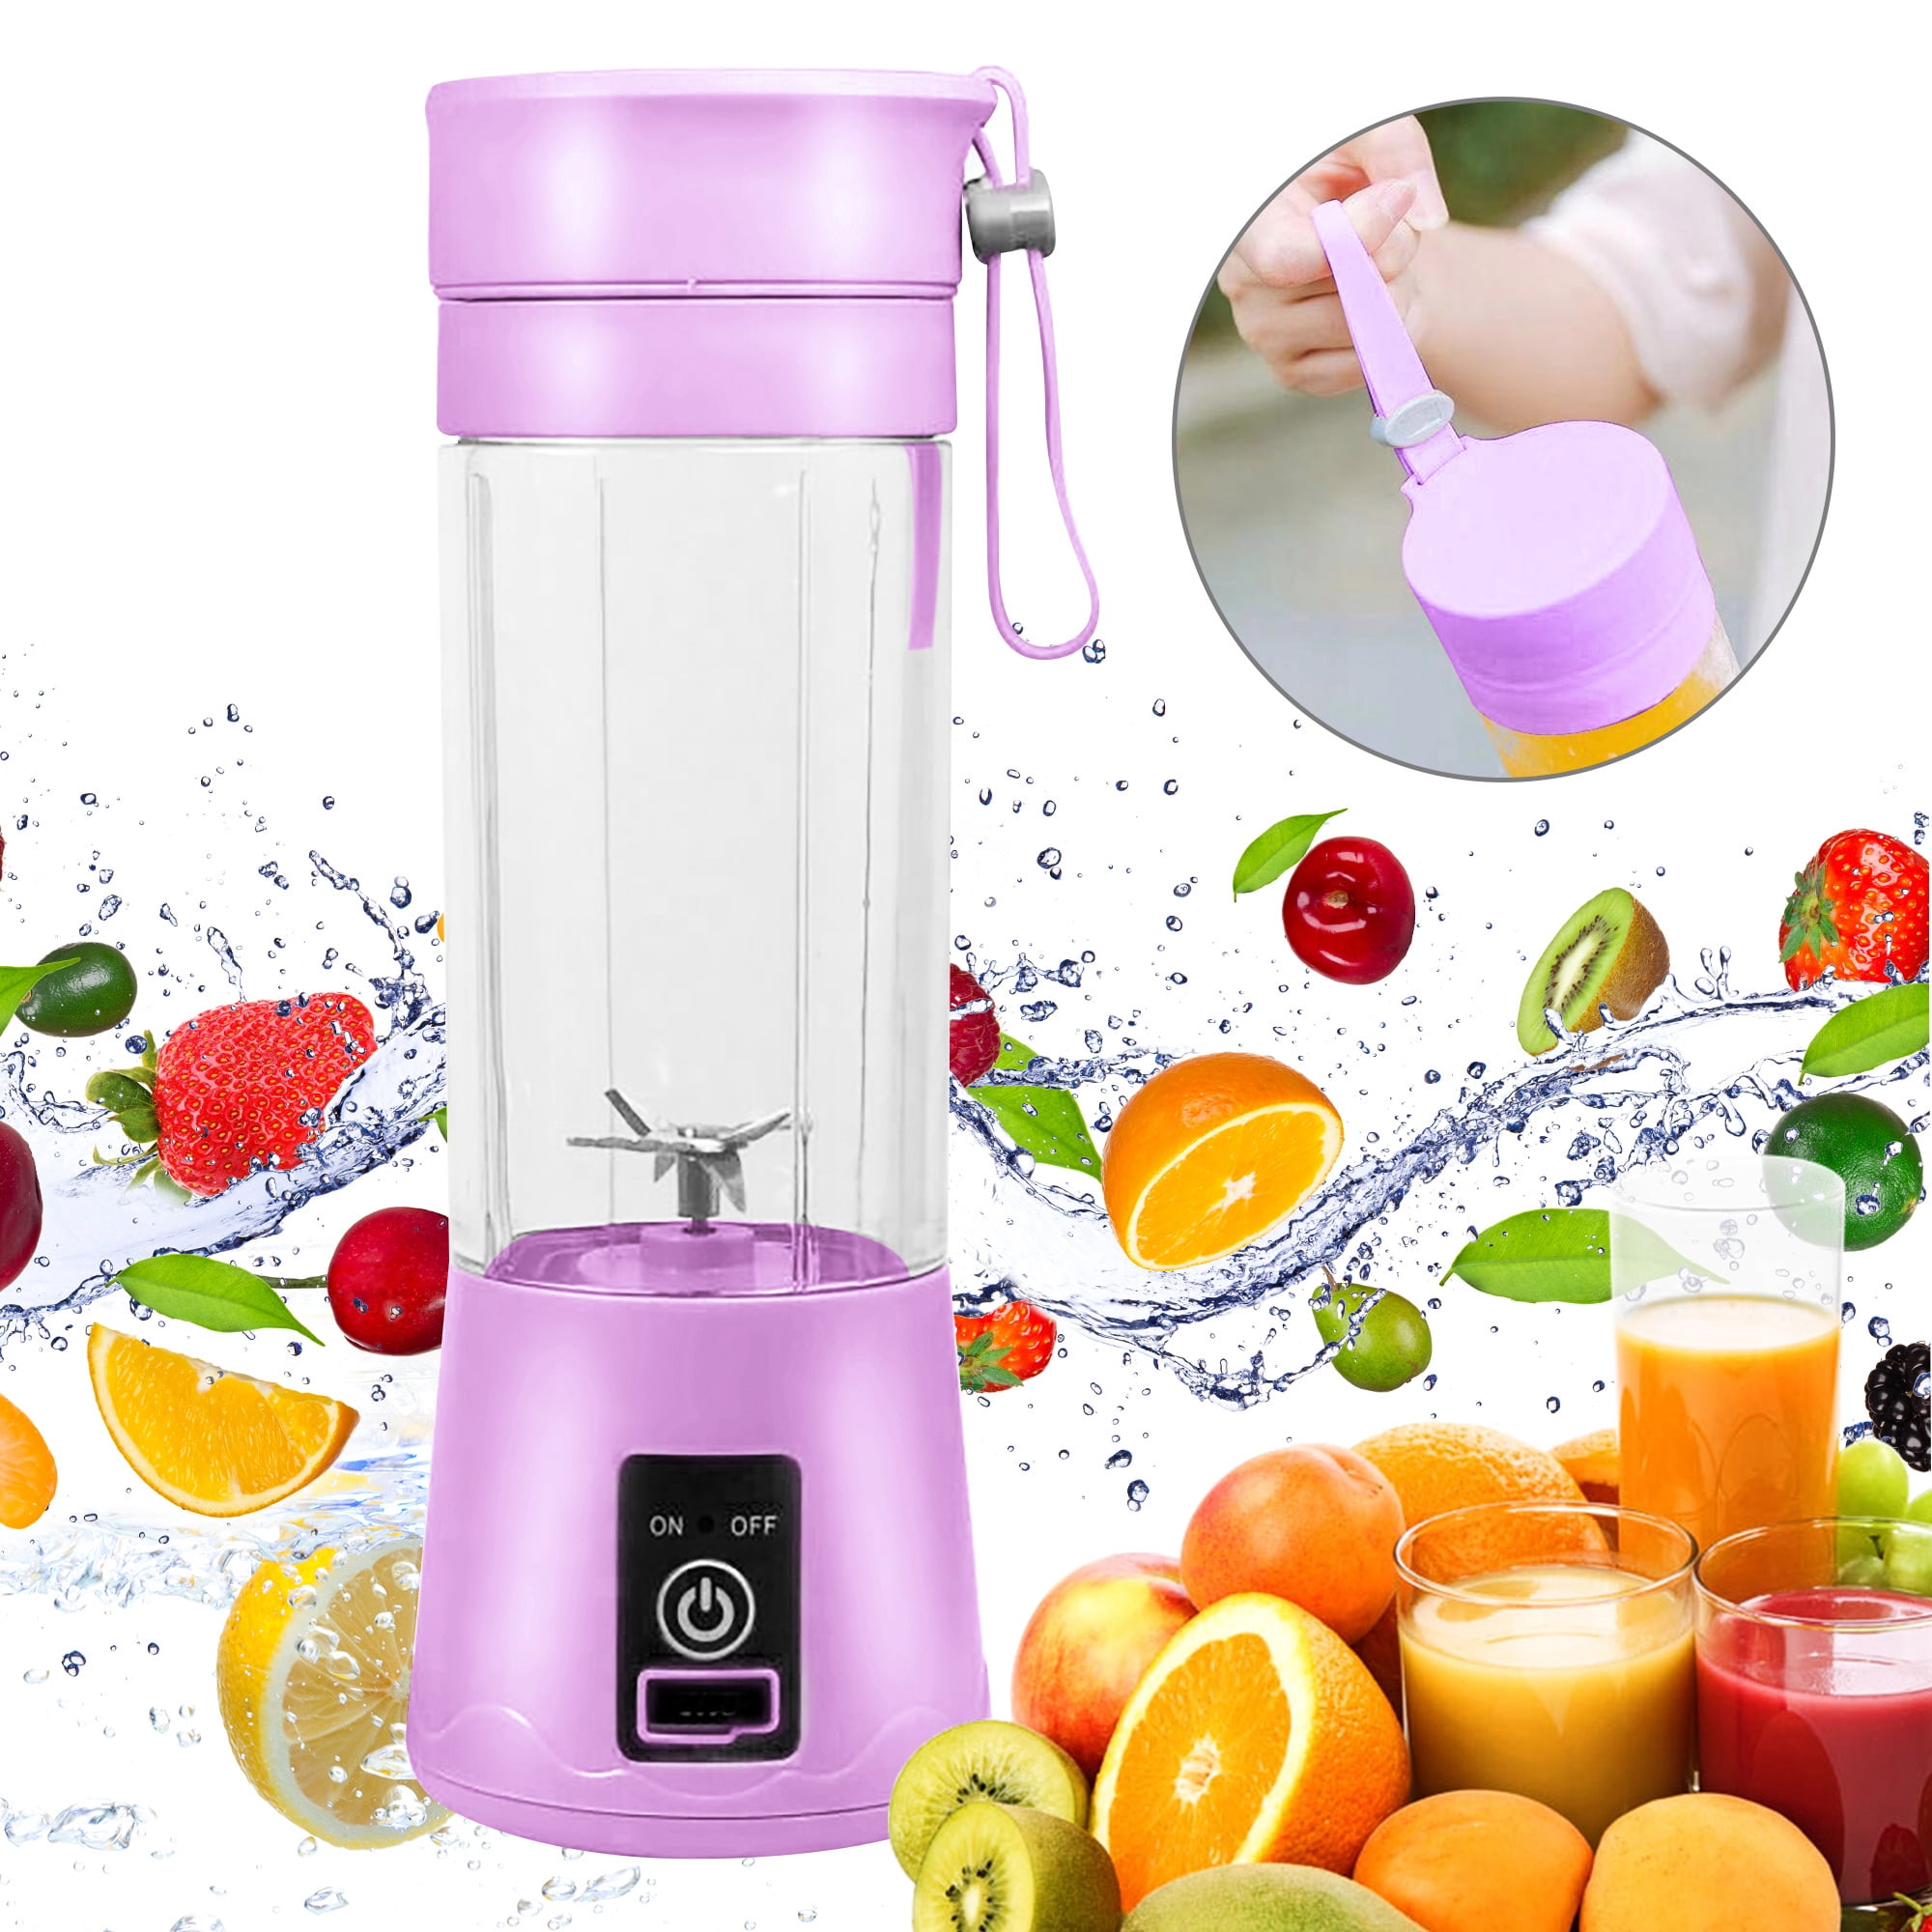 Youloveit Mini Juicer Cup 380ml Personal Blender Travel Fruit Juicer Mixer Cup Small Electric Safety Individual Blender Baby Food Mixing Machince with